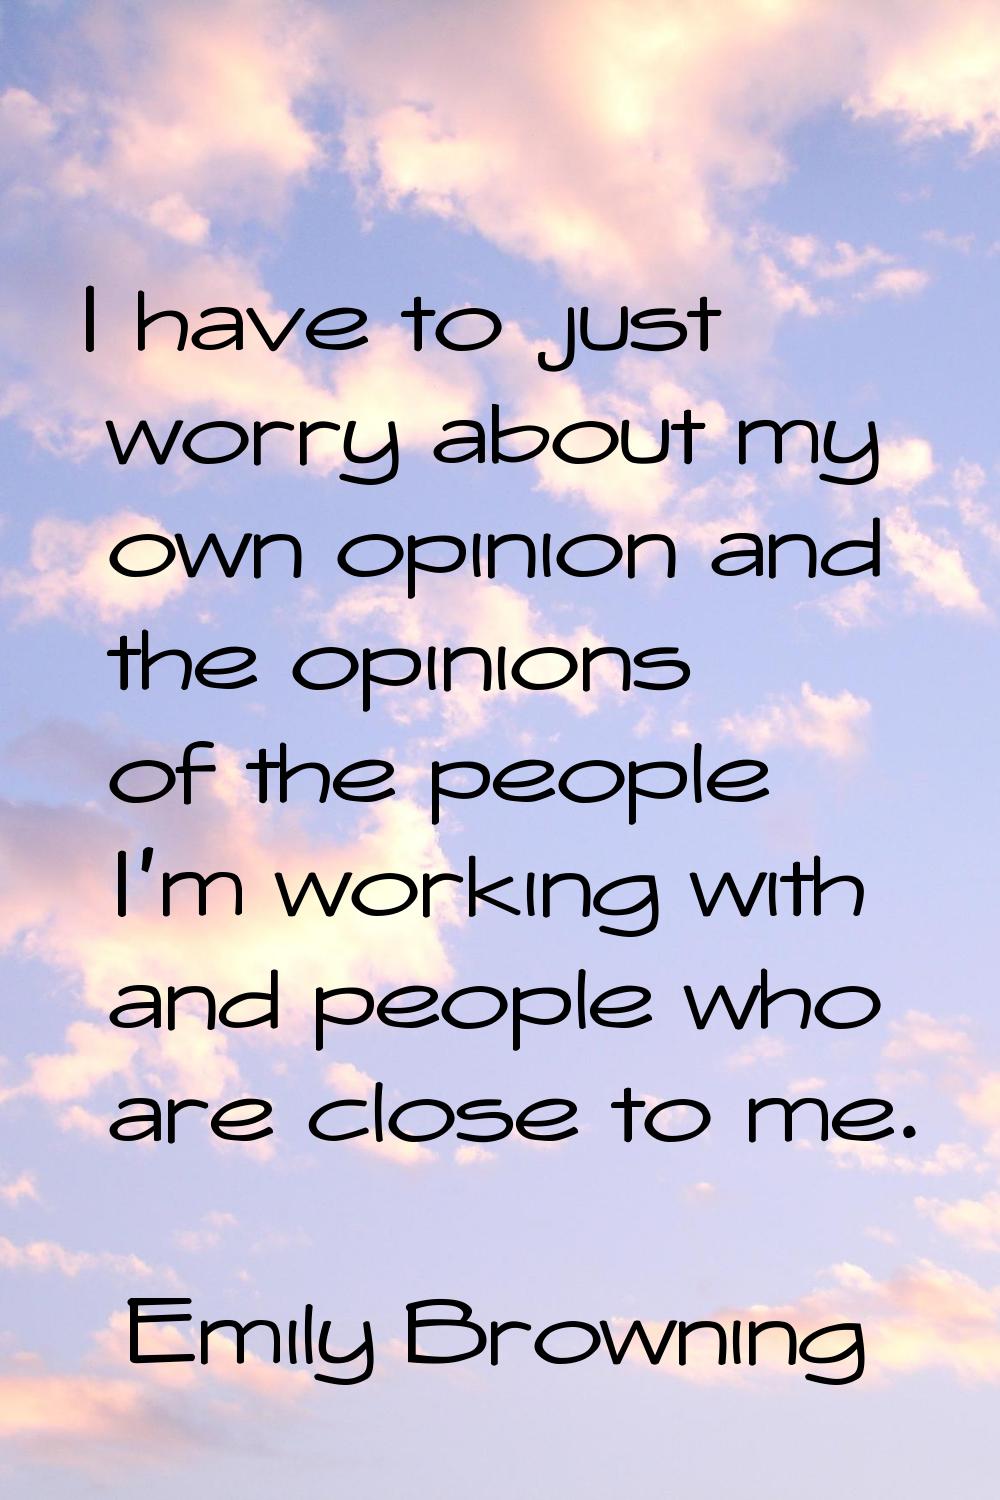 I have to just worry about my own opinion and the opinions of the people I'm working with and peopl